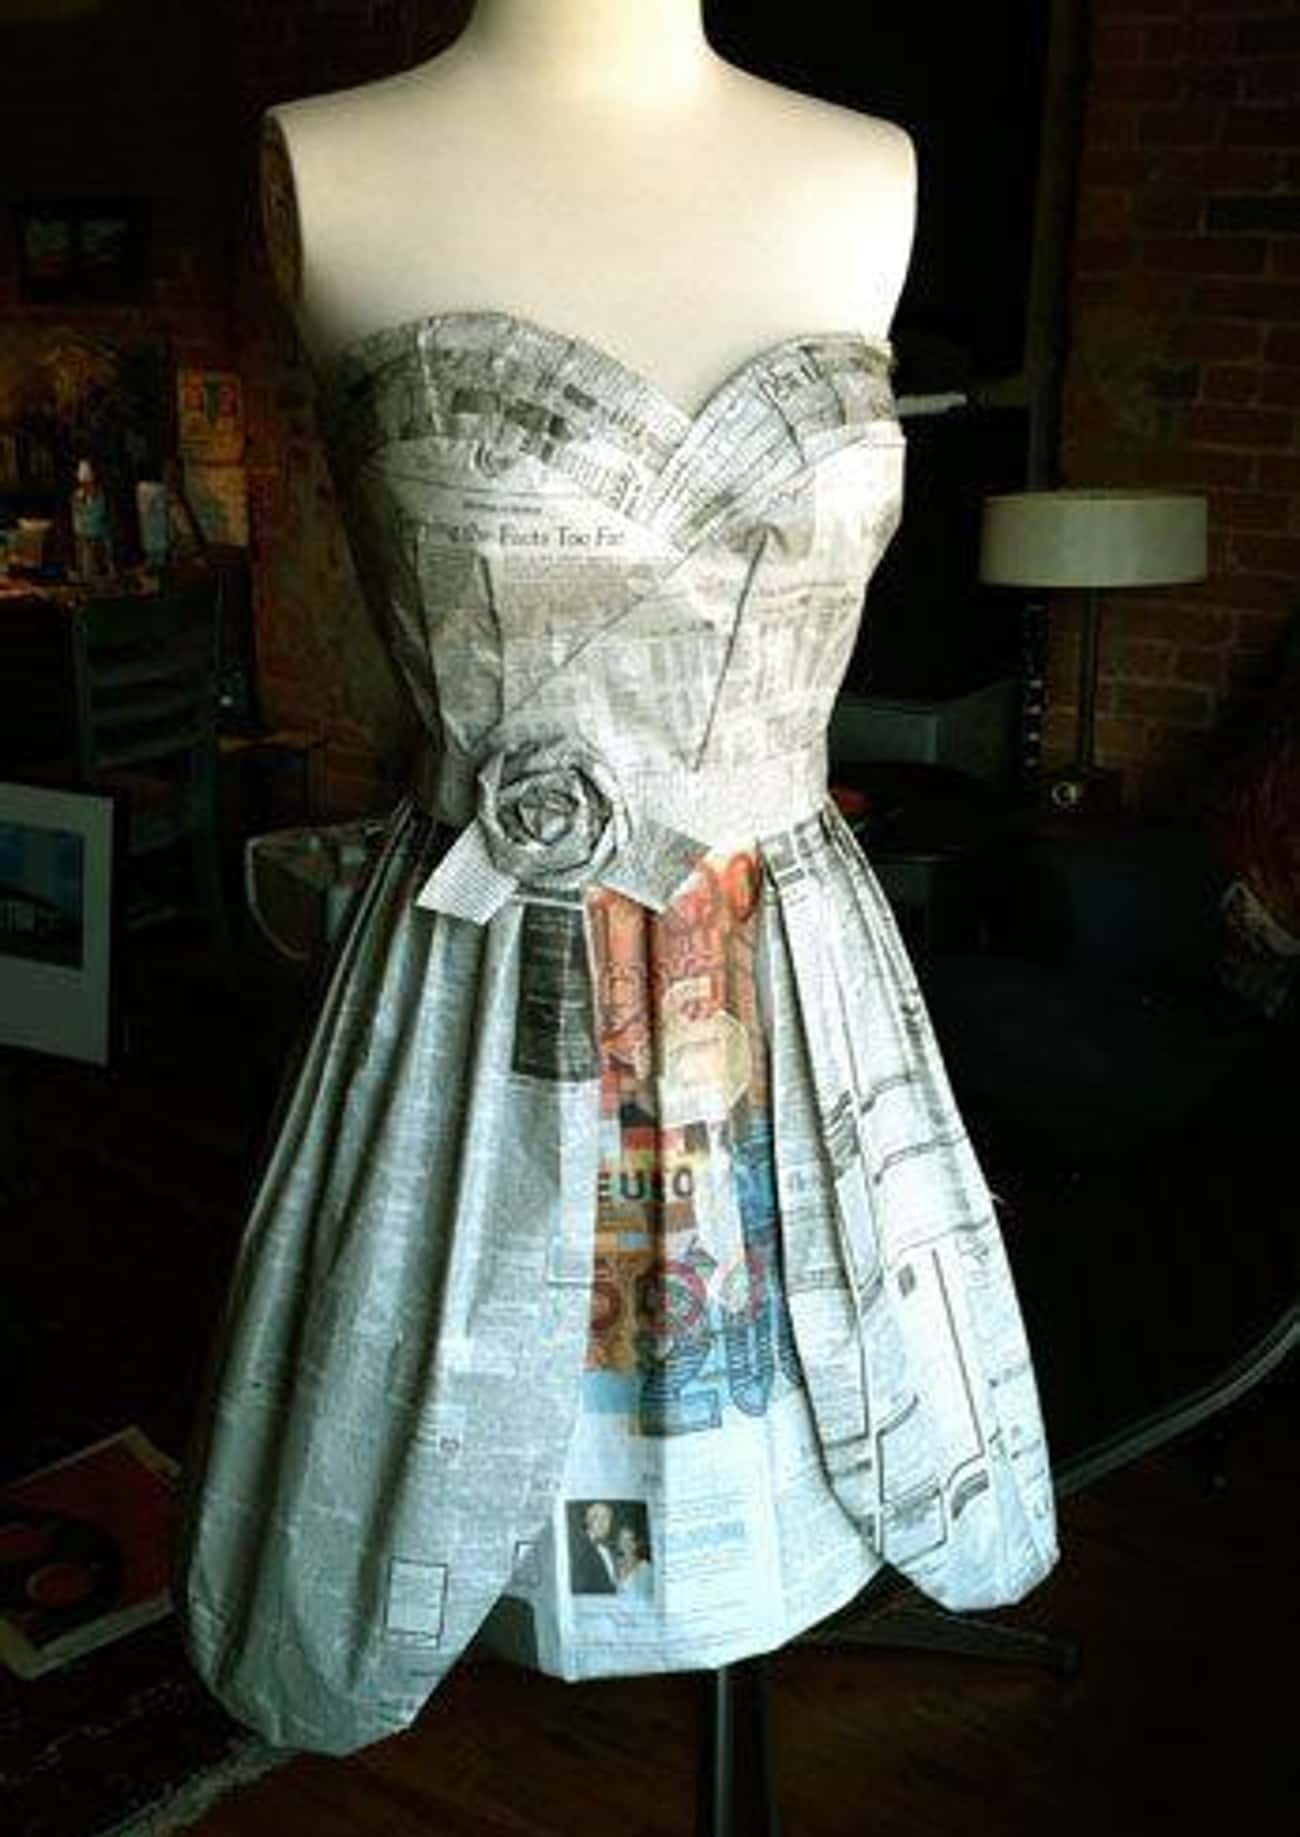 A Dress That Would Make the Newspaper